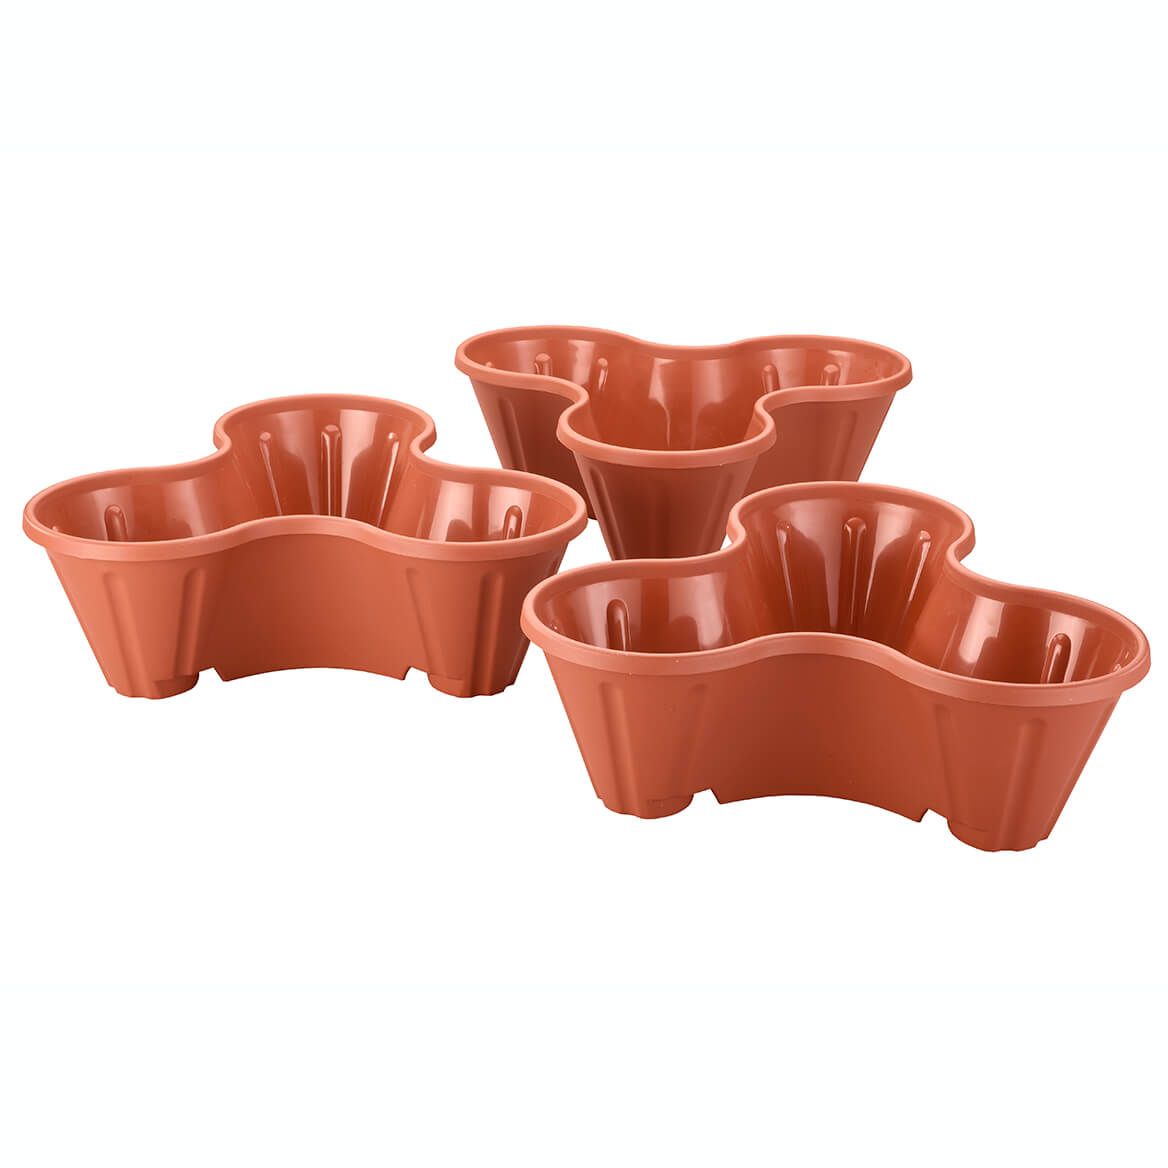 Stackable Planters, Set of 3 + '-' + 351187